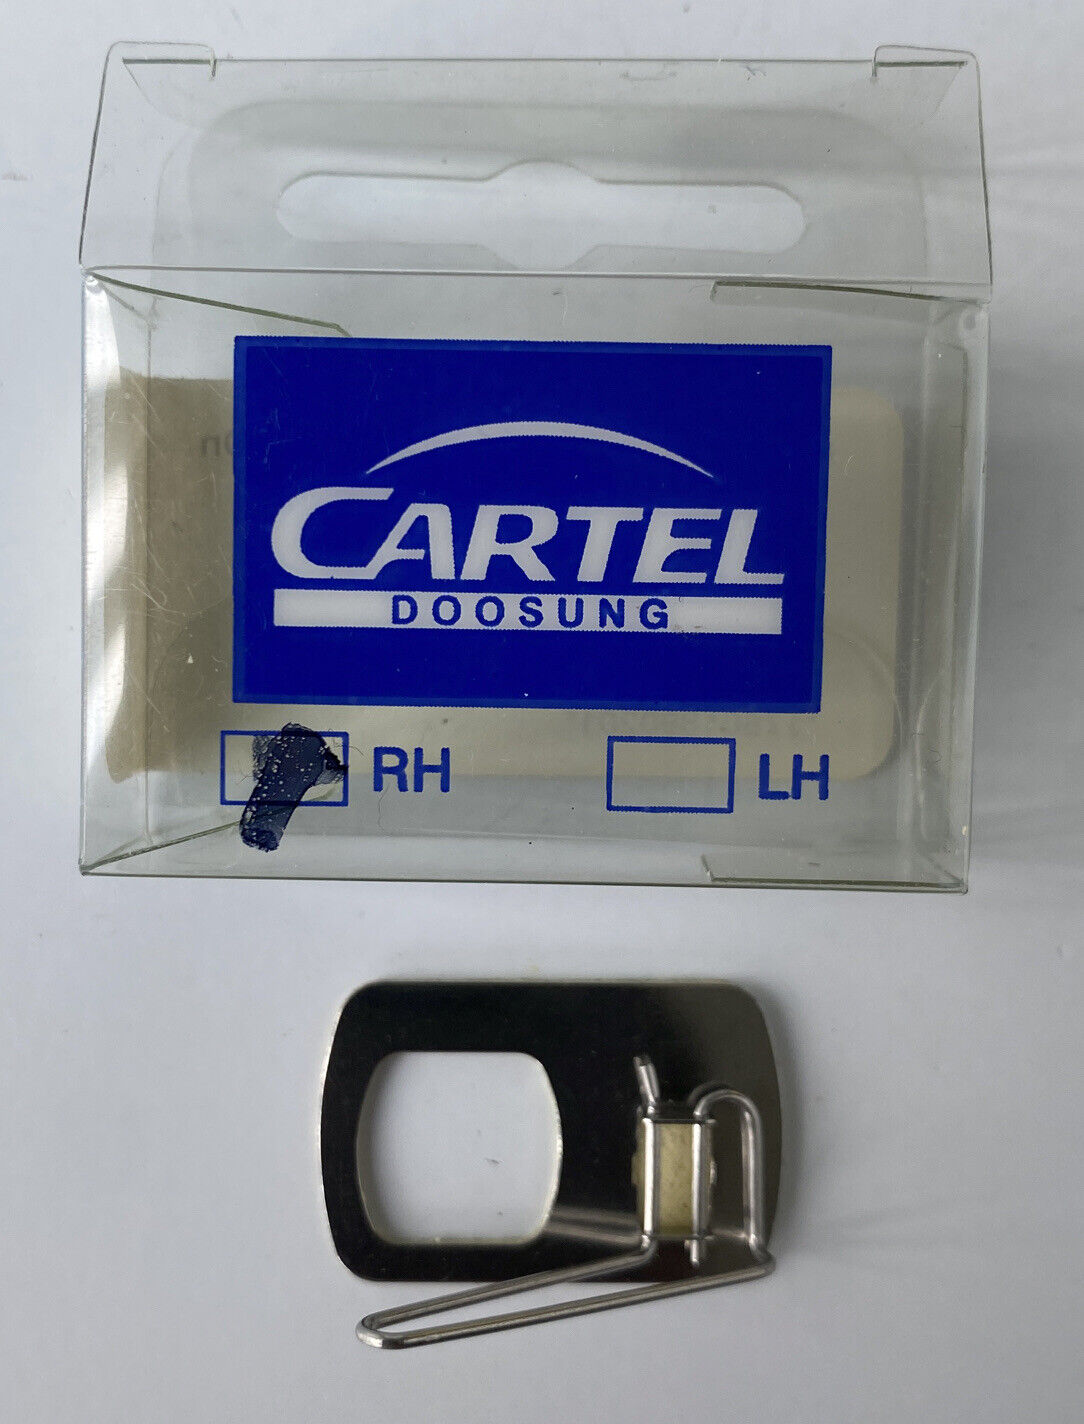 New!! Cartel Doosung Arrow Rest Stick-On Rest RH for Recurve & Traditional Bows